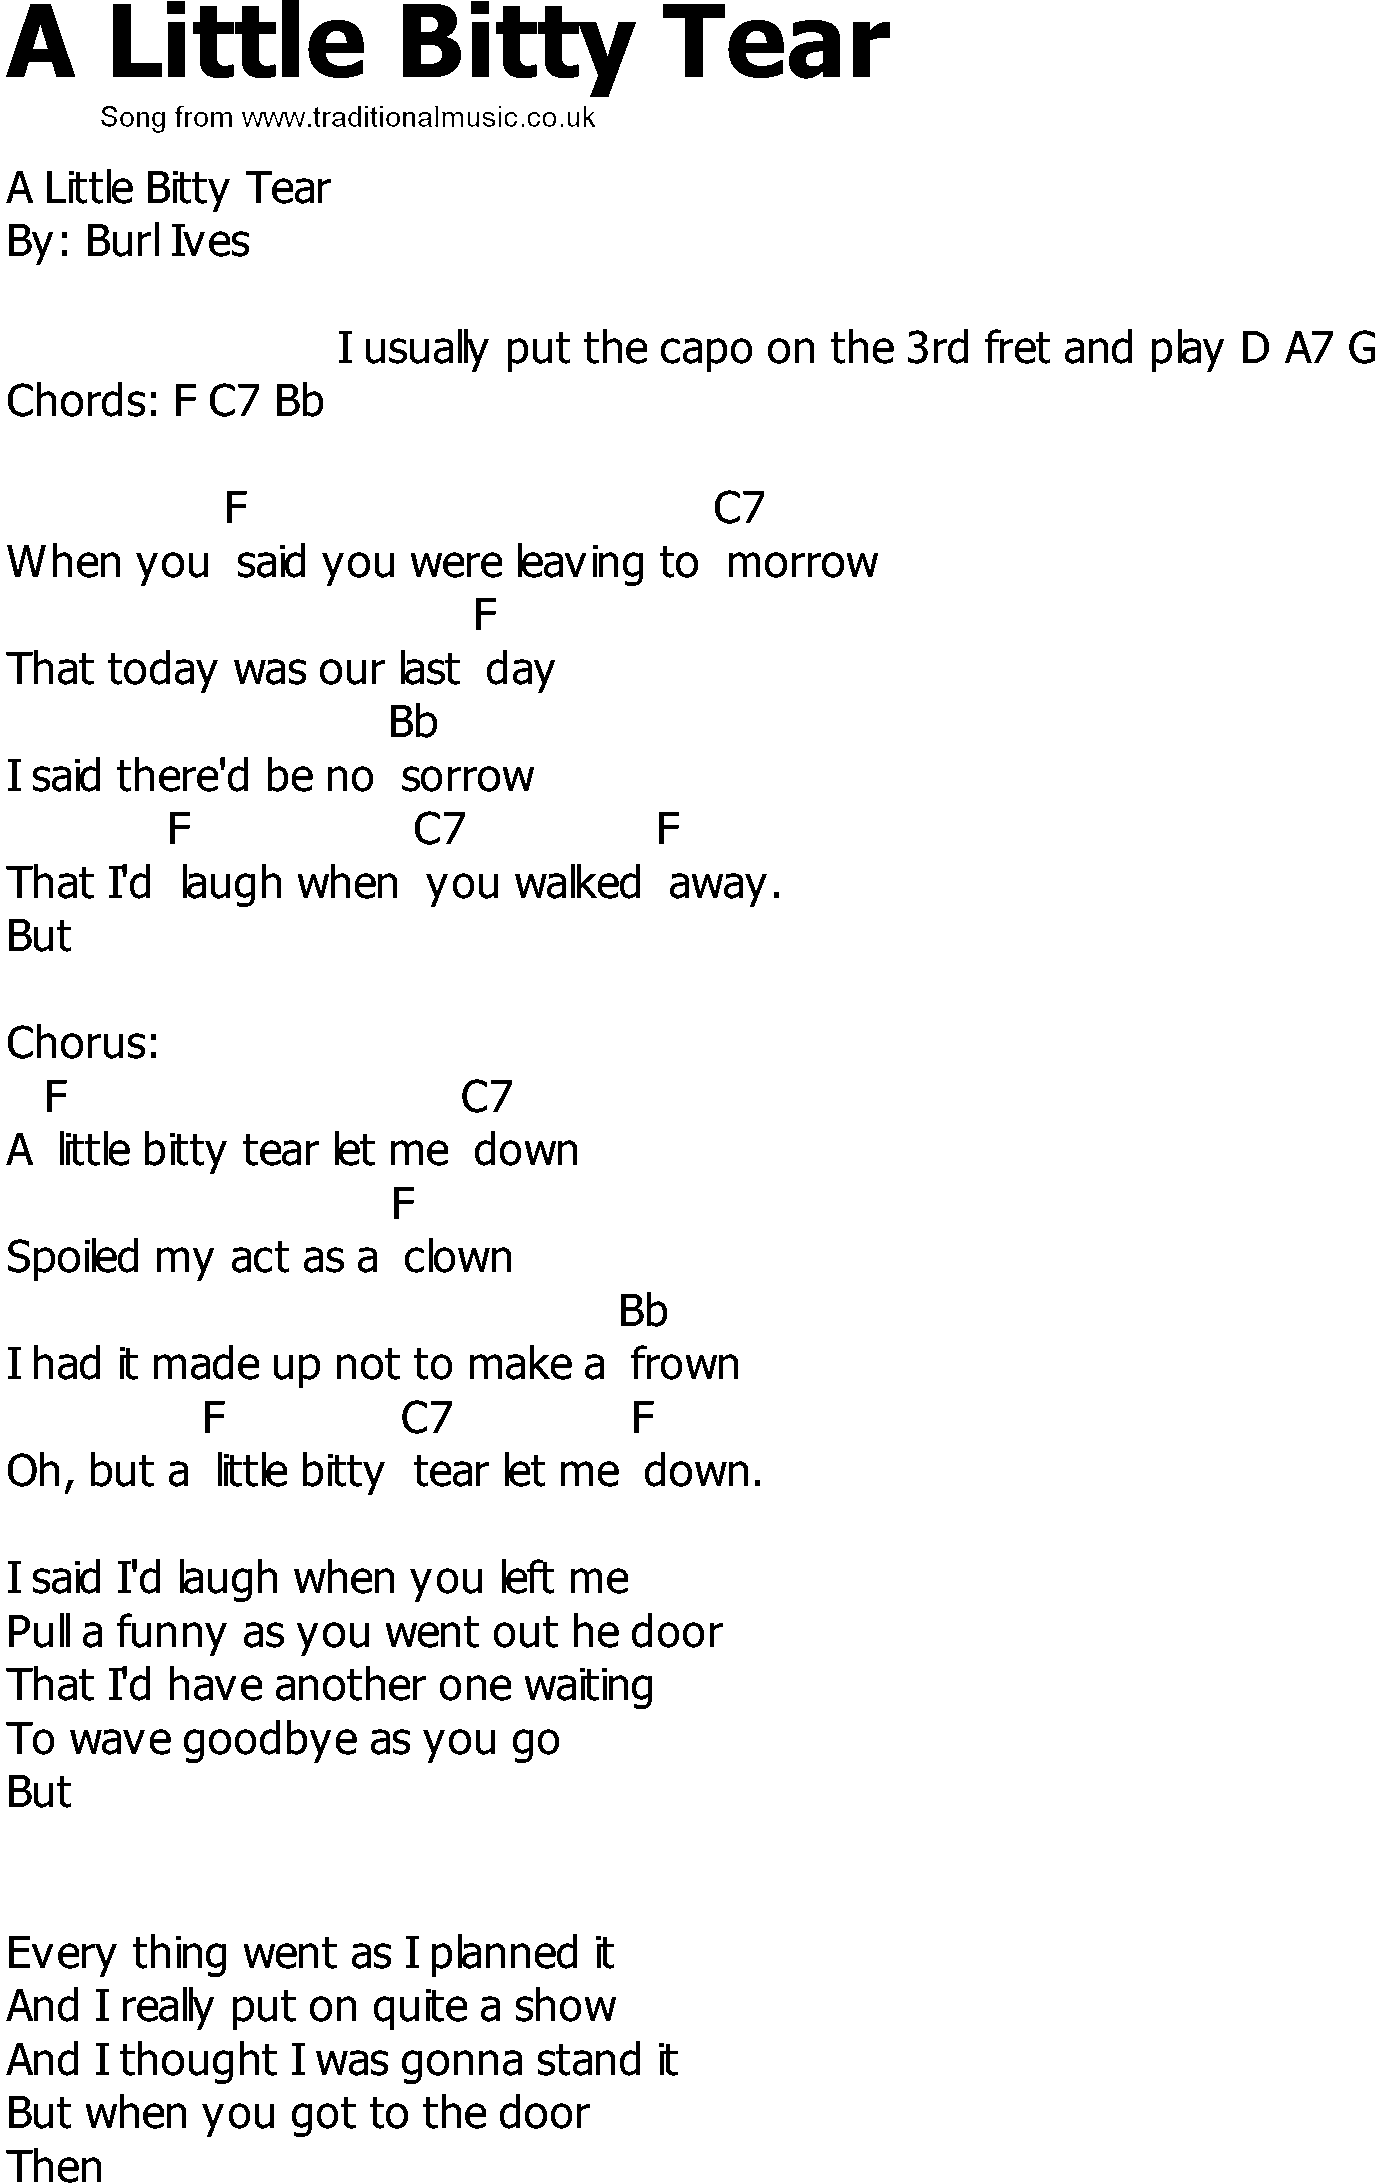 Old Country song lyrics with chords - A Little Bitty Tear